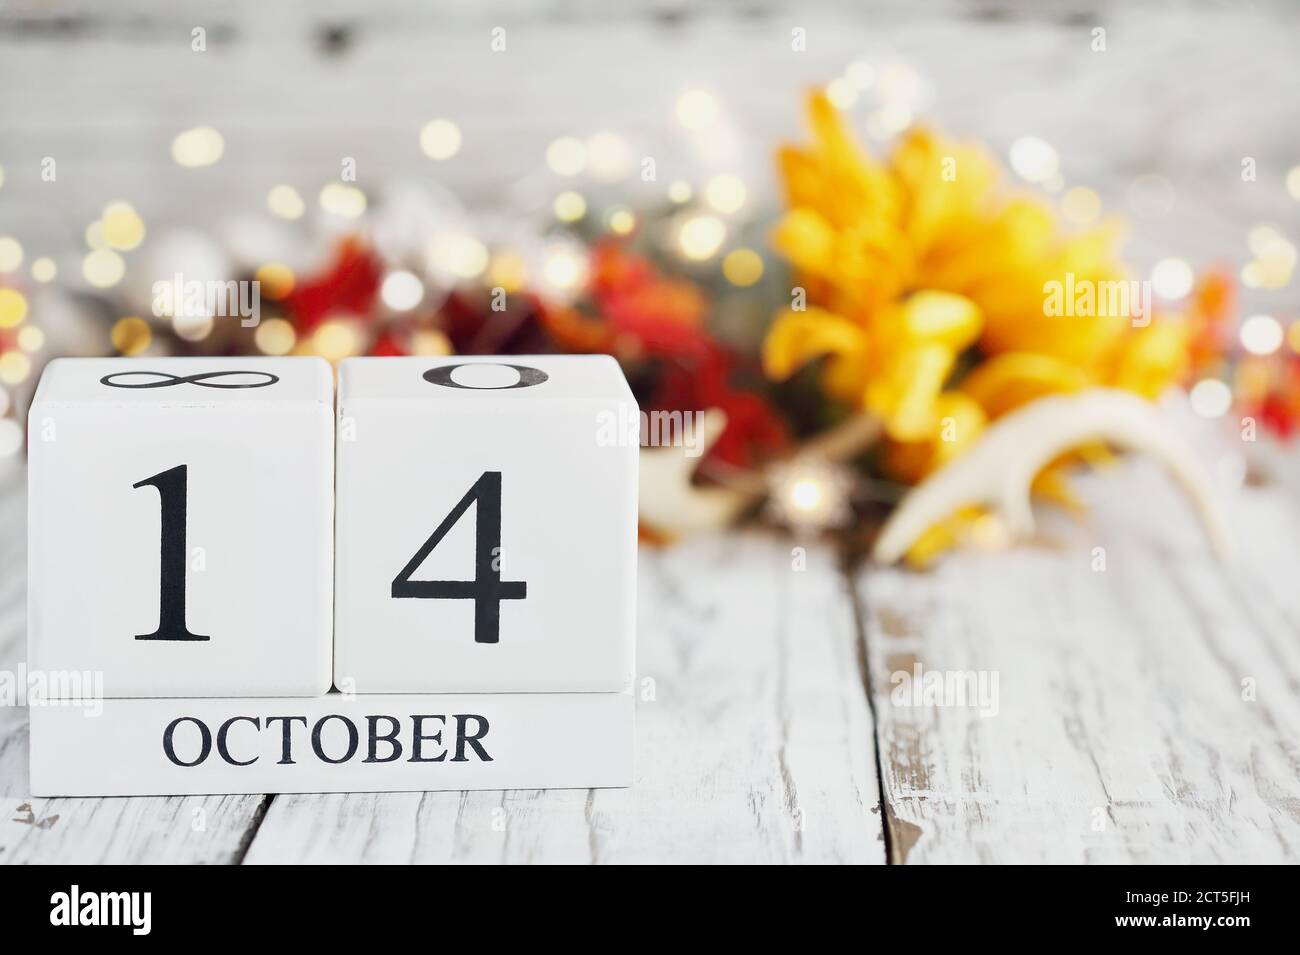 White wood calendar blocks with the date October 14th and autumn decorations over a wooden table. Selective focus with blurred background. Stock Photo